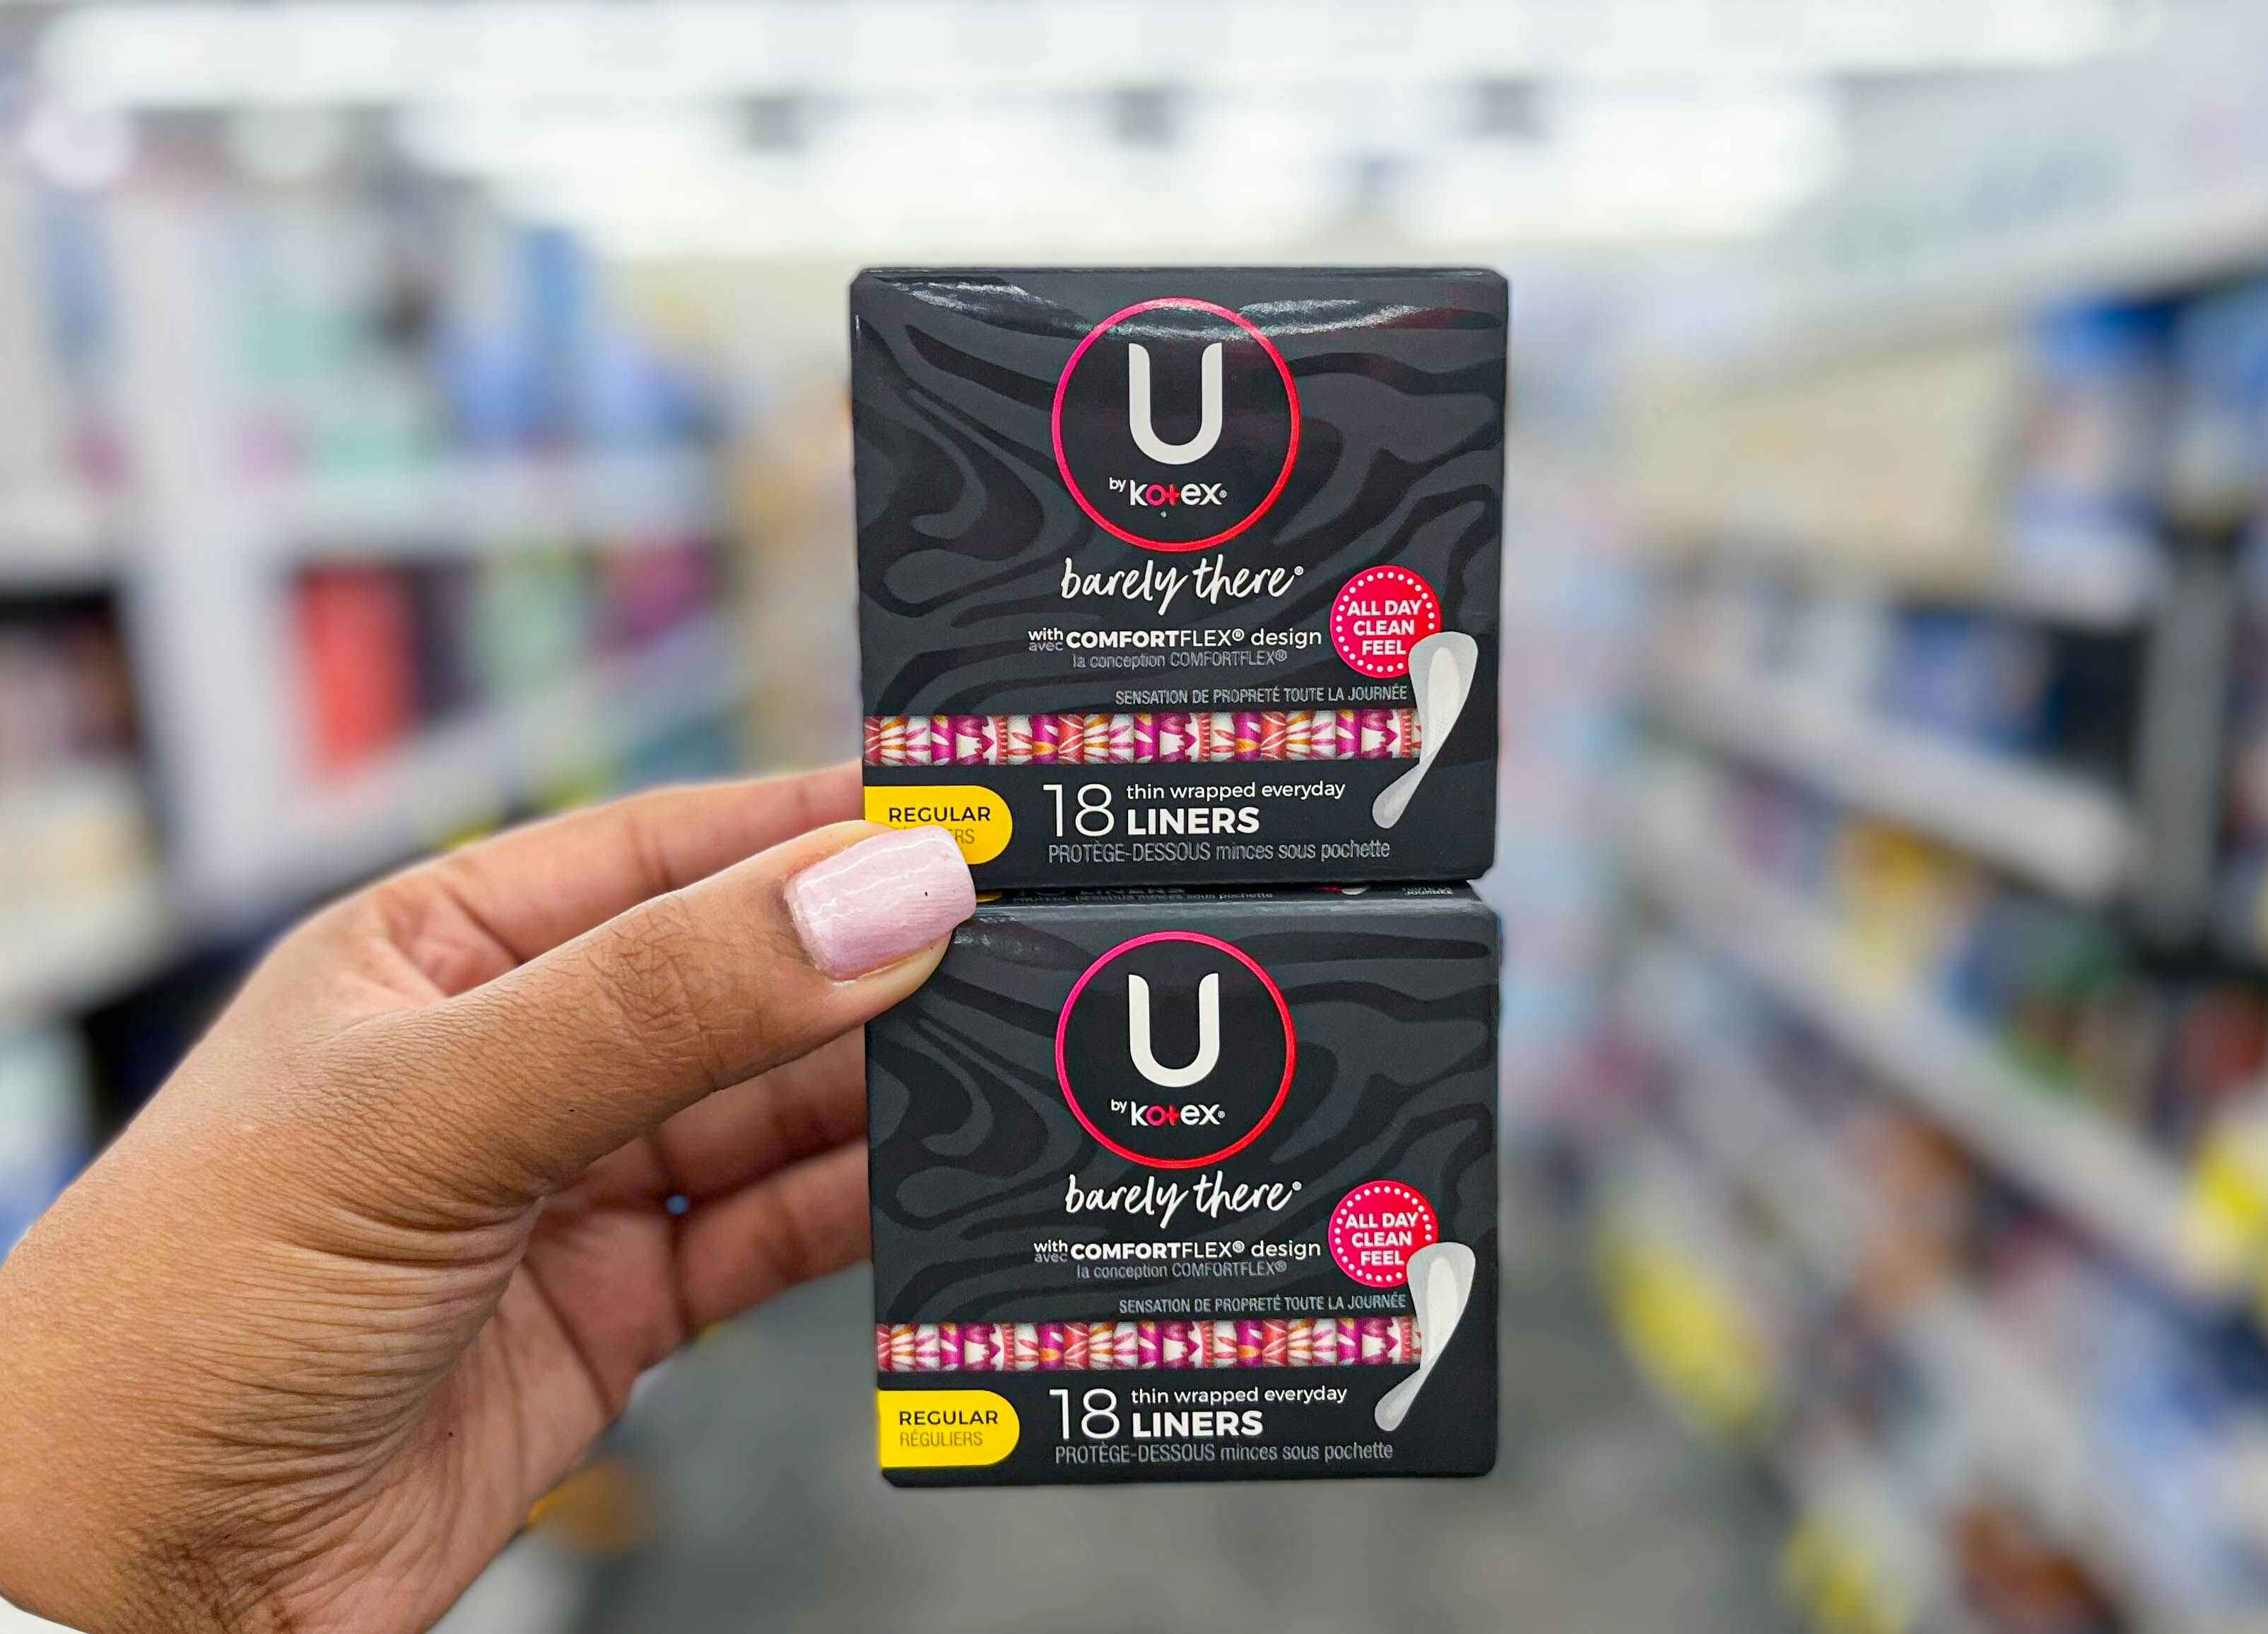 cvs-u-by-kotex-barely-there-liners-2